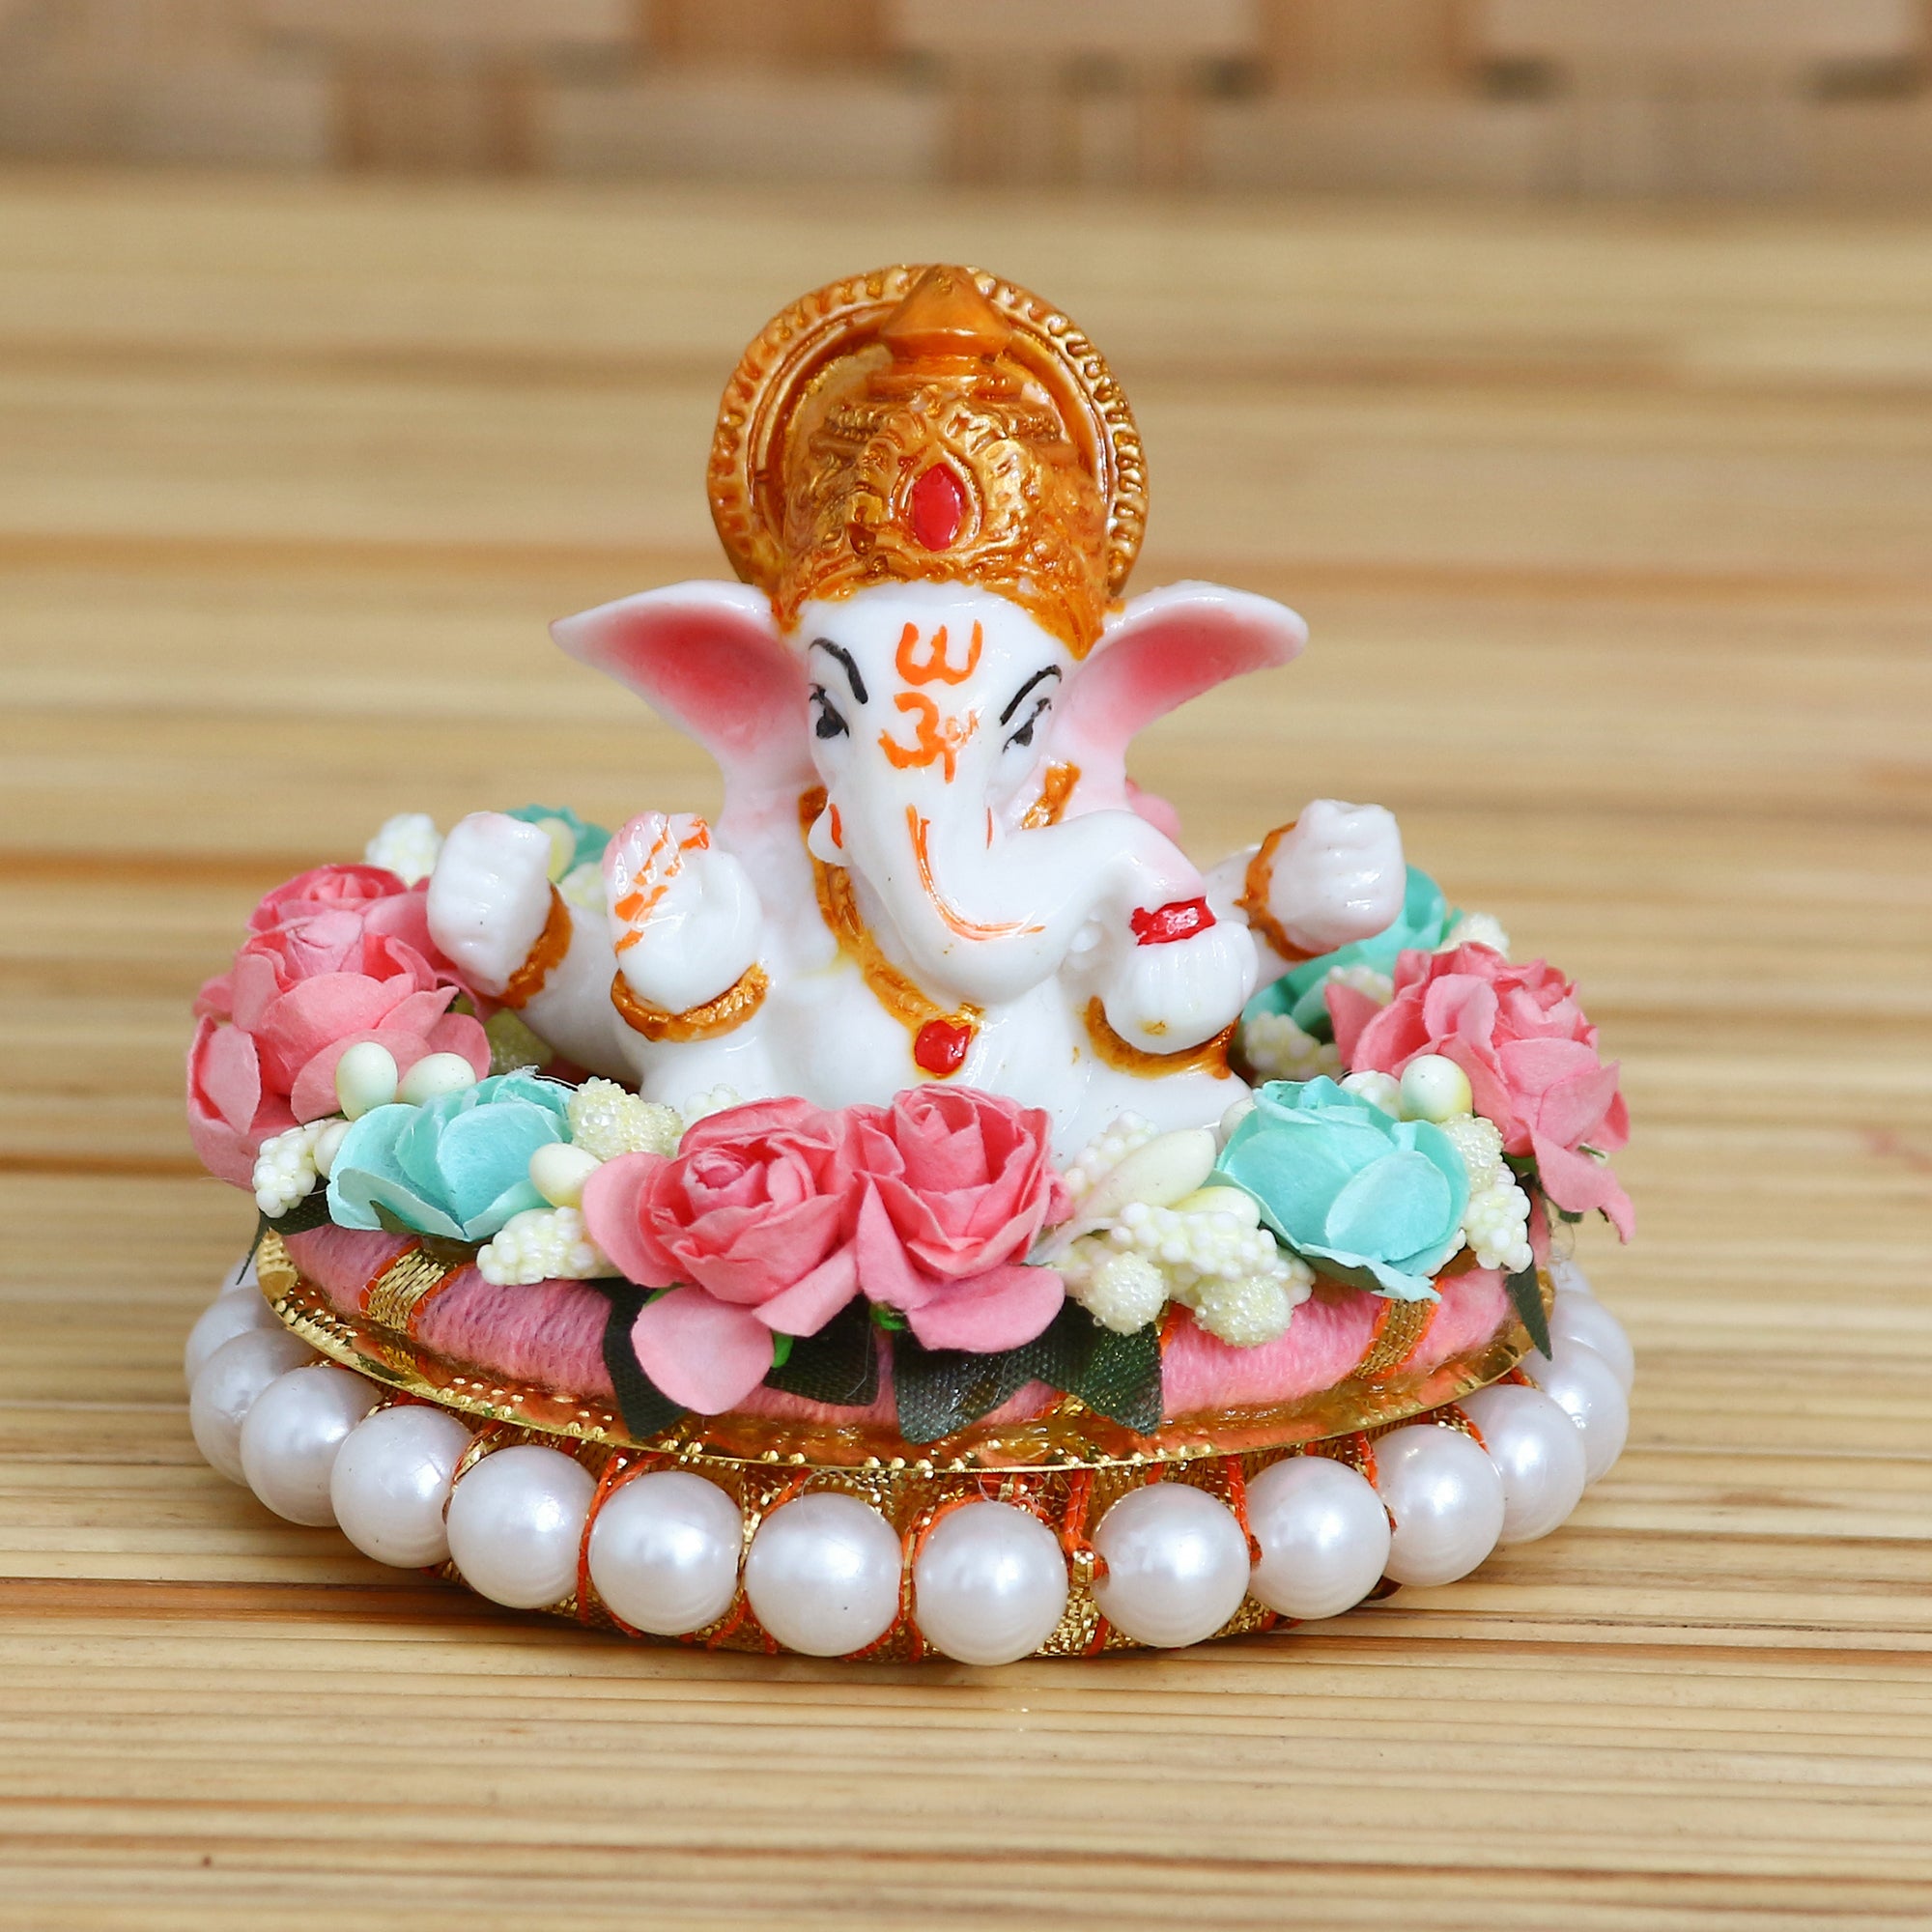 Lord Ganesha Idol On Decorative Handcrafted Colorful Flowers Plate